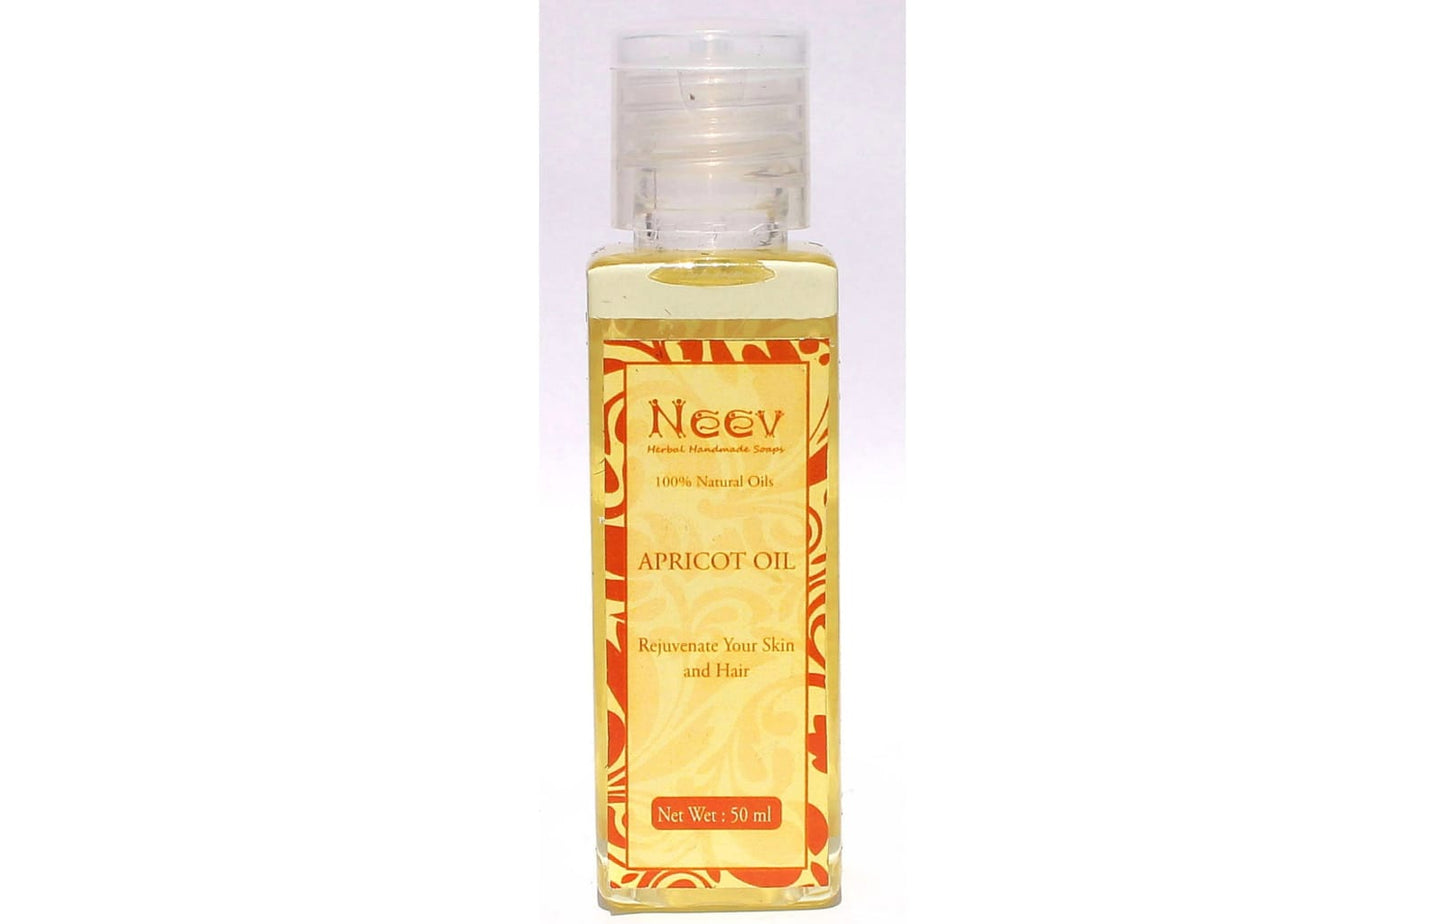 Apricot Oil Rejuvenate Your Charm and Glow